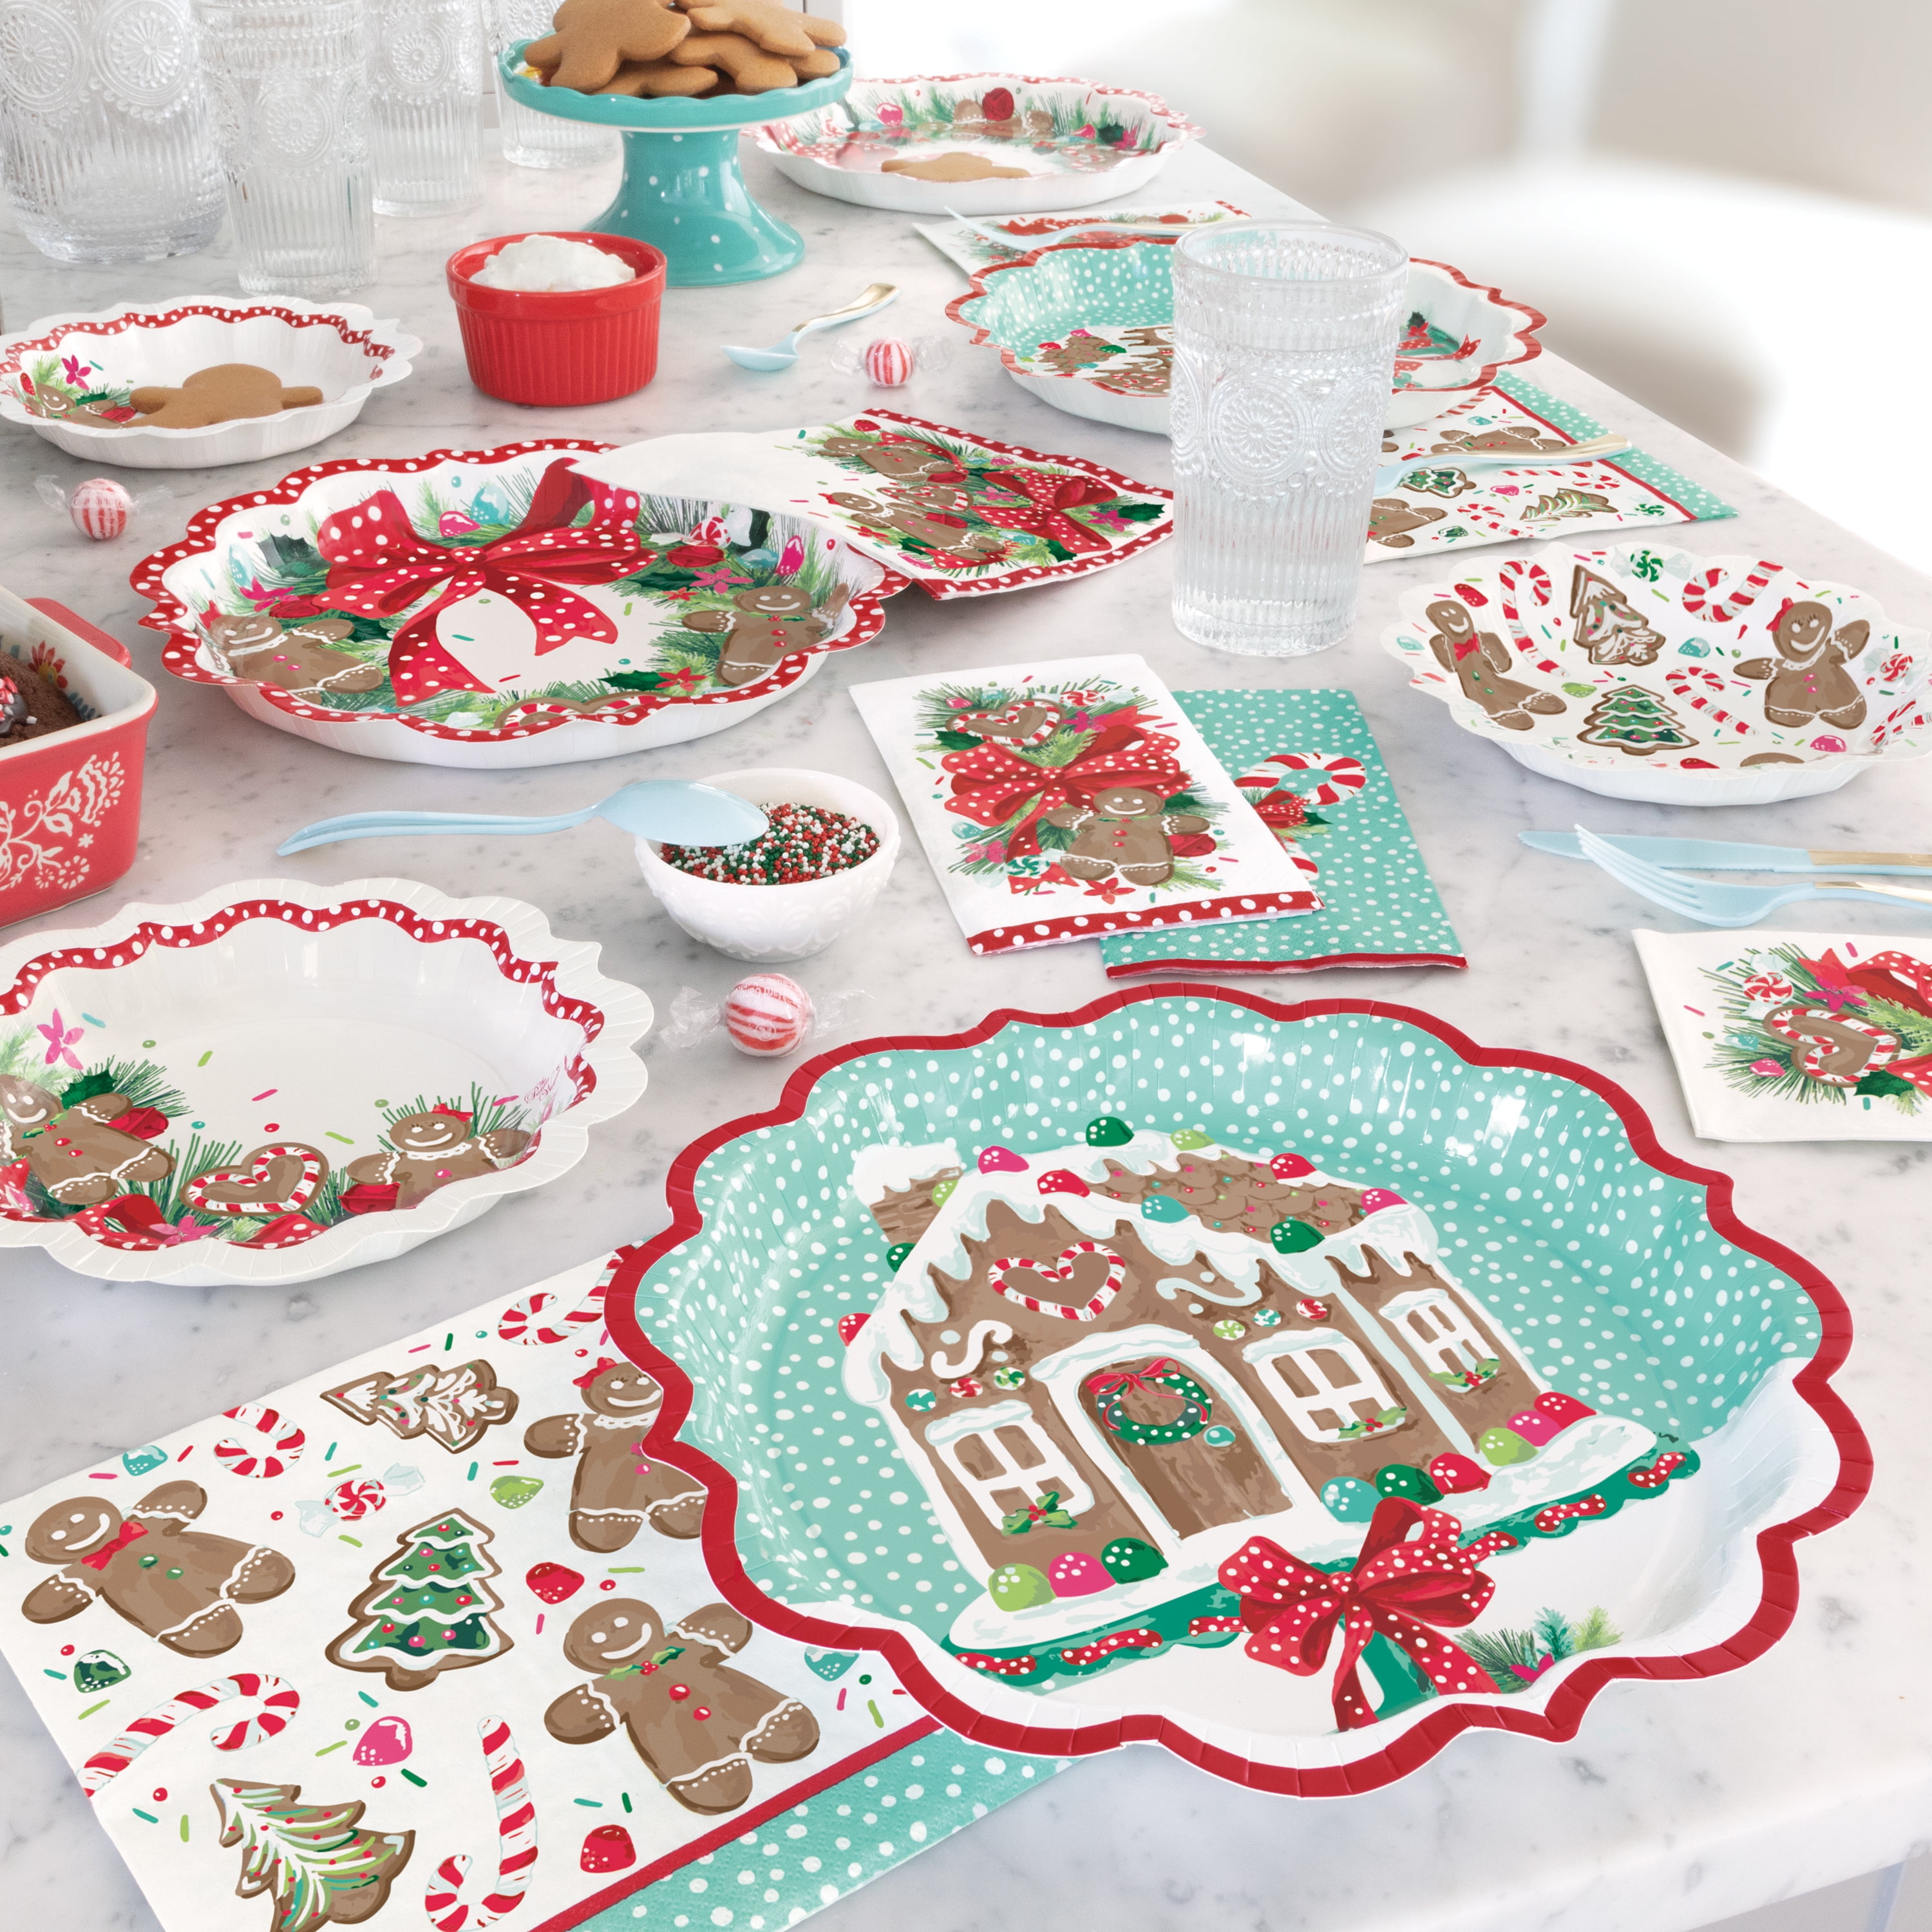 Napkins and Gues The Pioneer Woman Gingerbread House Collection of Paper Plates